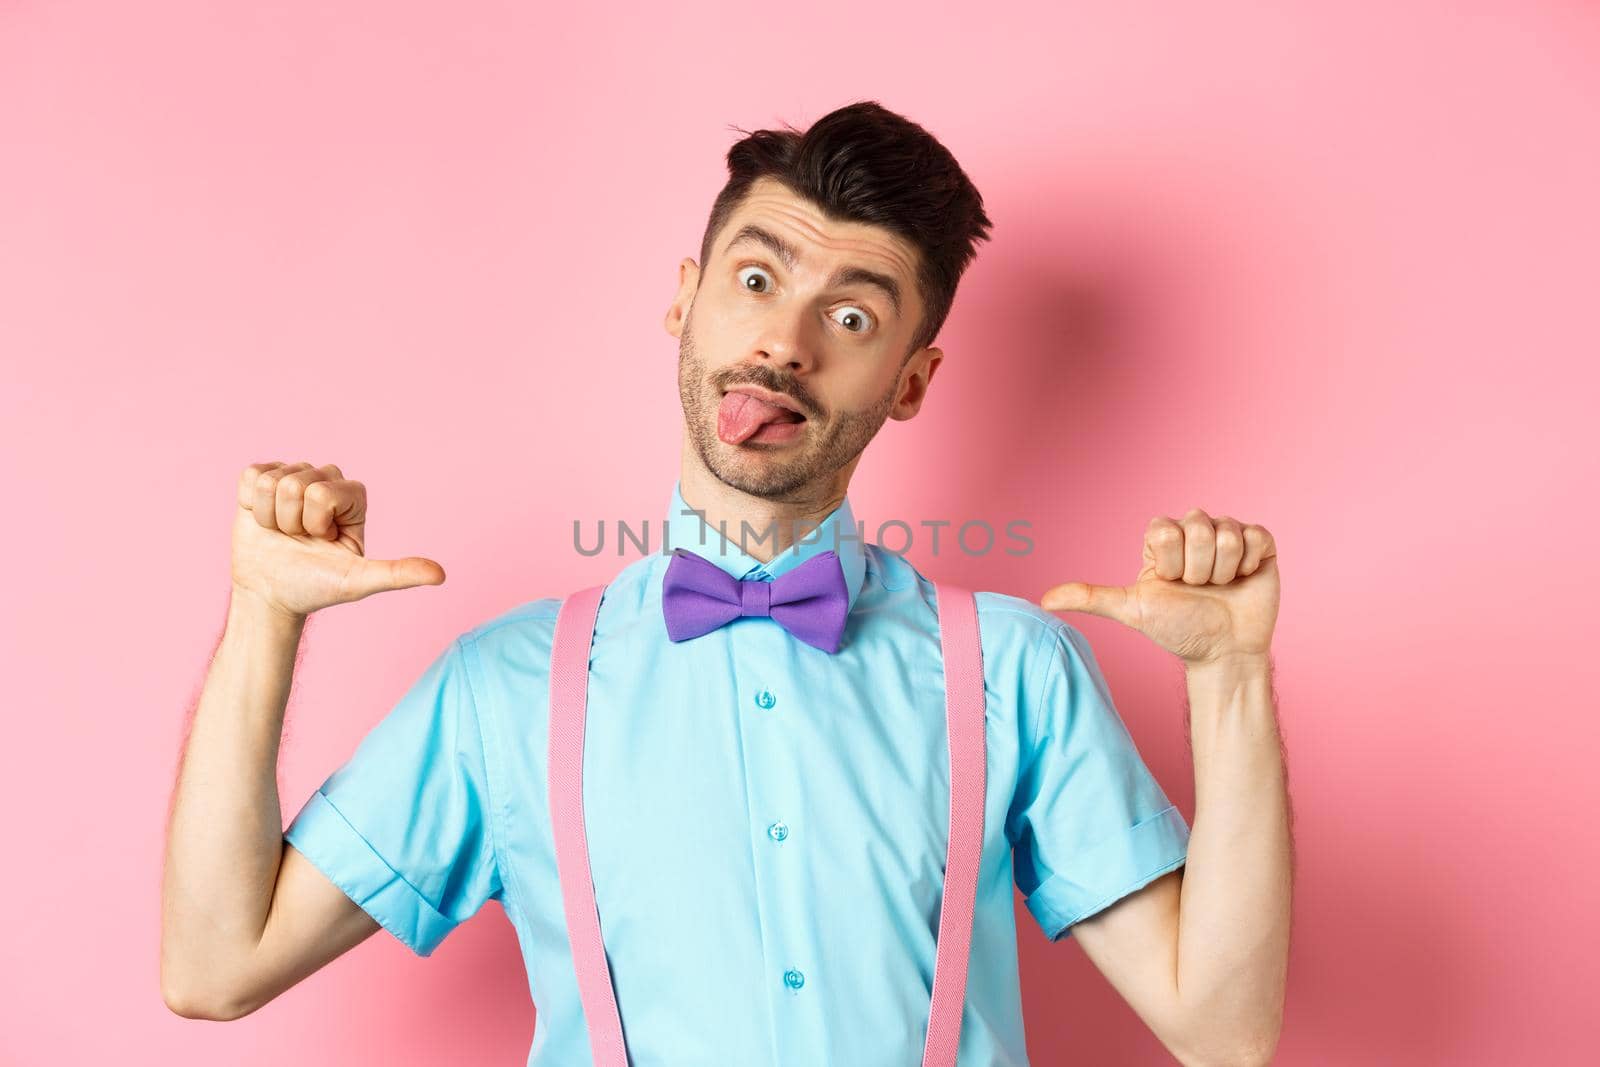 Funny guy in suspenders and bow-tie showing tongue, pointing at himself as if self-promoting, standing over pink background.